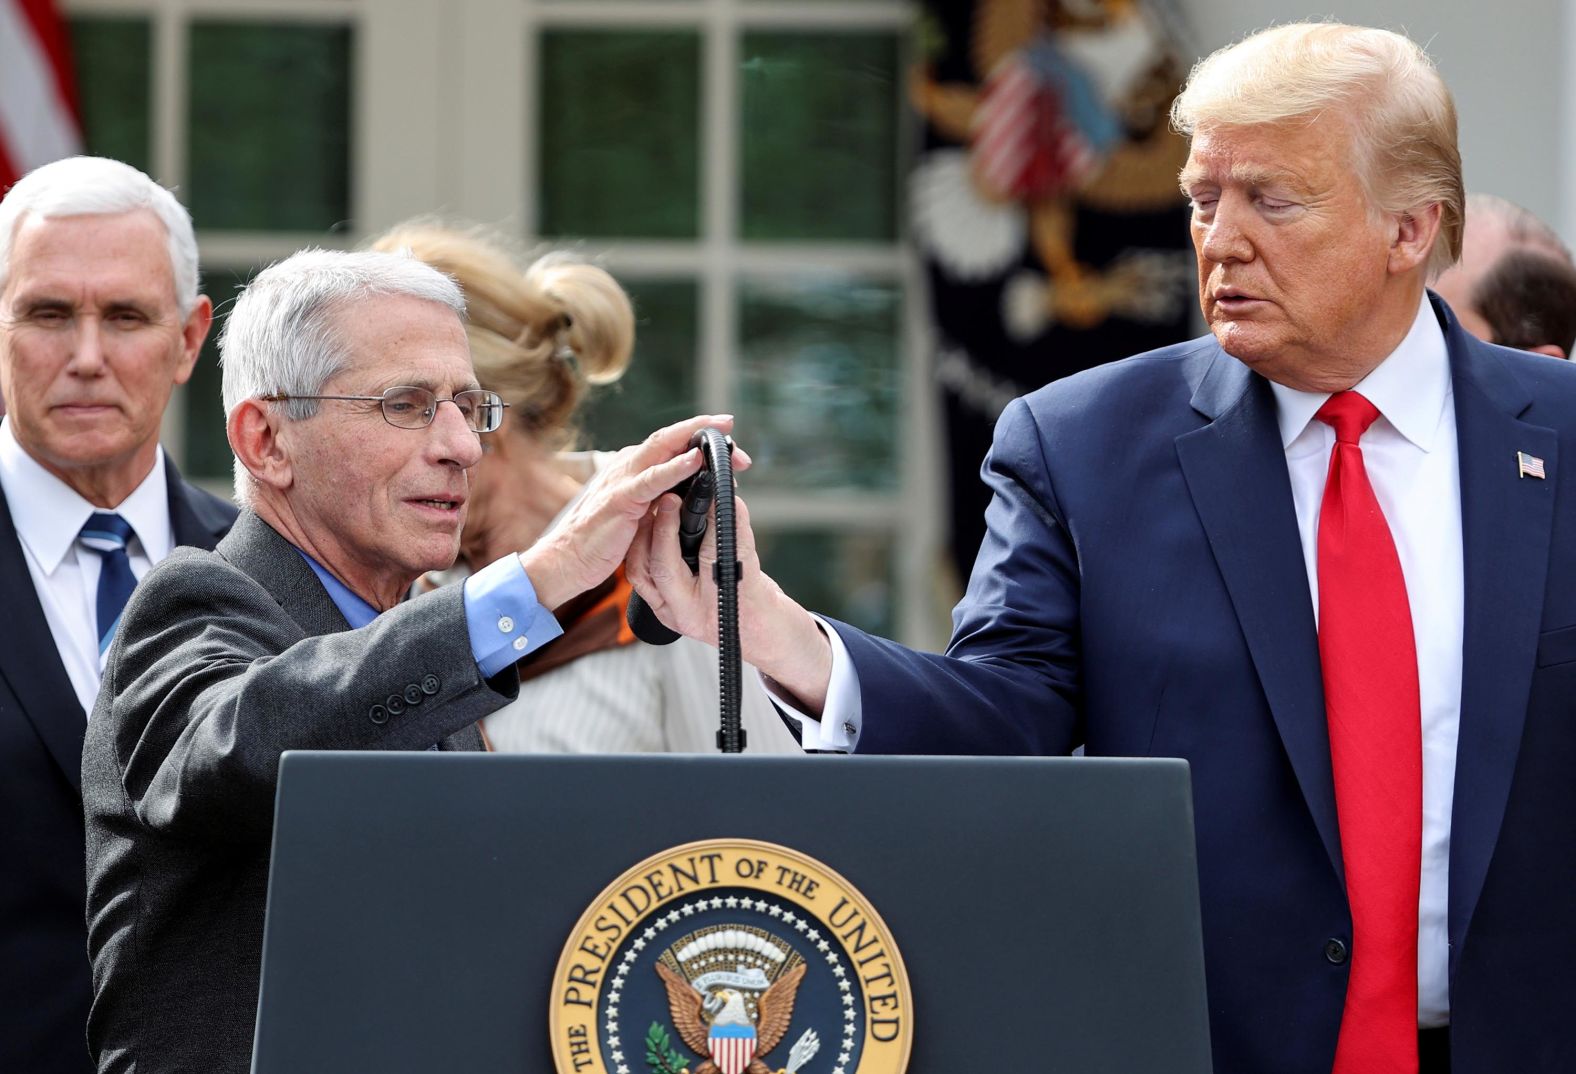 Trump introduces Fauci after declaring the coronavirus pandemic a national emergency on March 13.